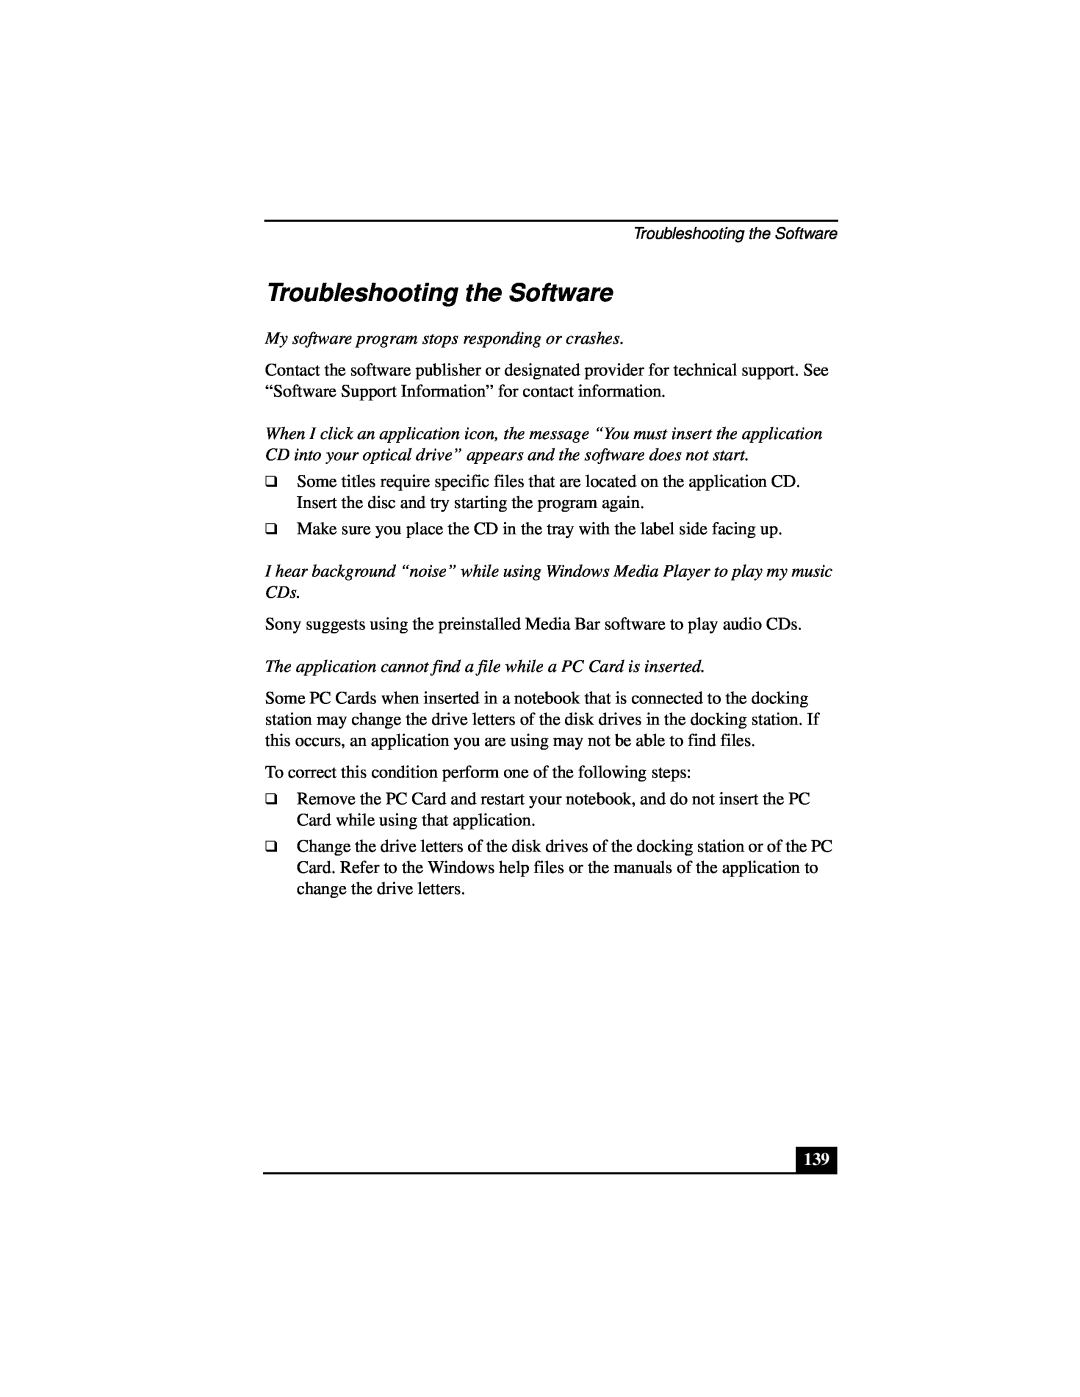 Sony Notebook Computer manual Troubleshooting the Software, My software program stops responding or crashes 